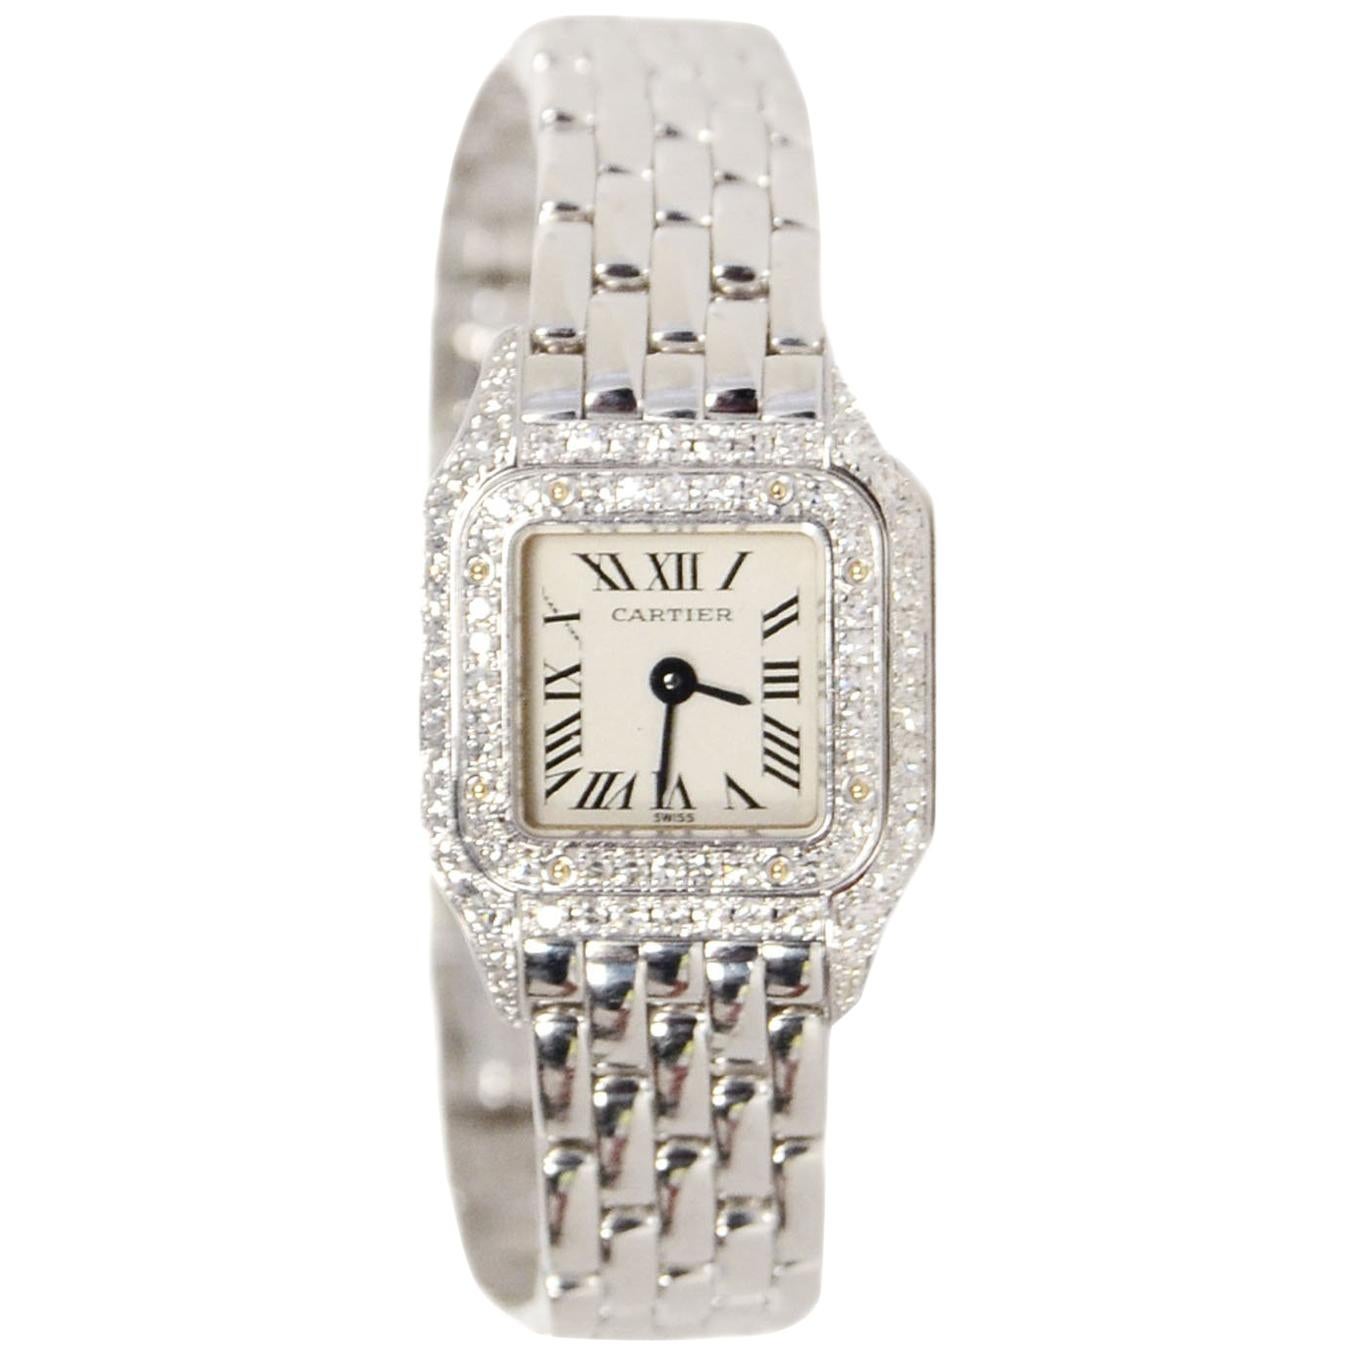 Cartier 18K White Gold 17mm Mini Panthere Watch with Diamonds 